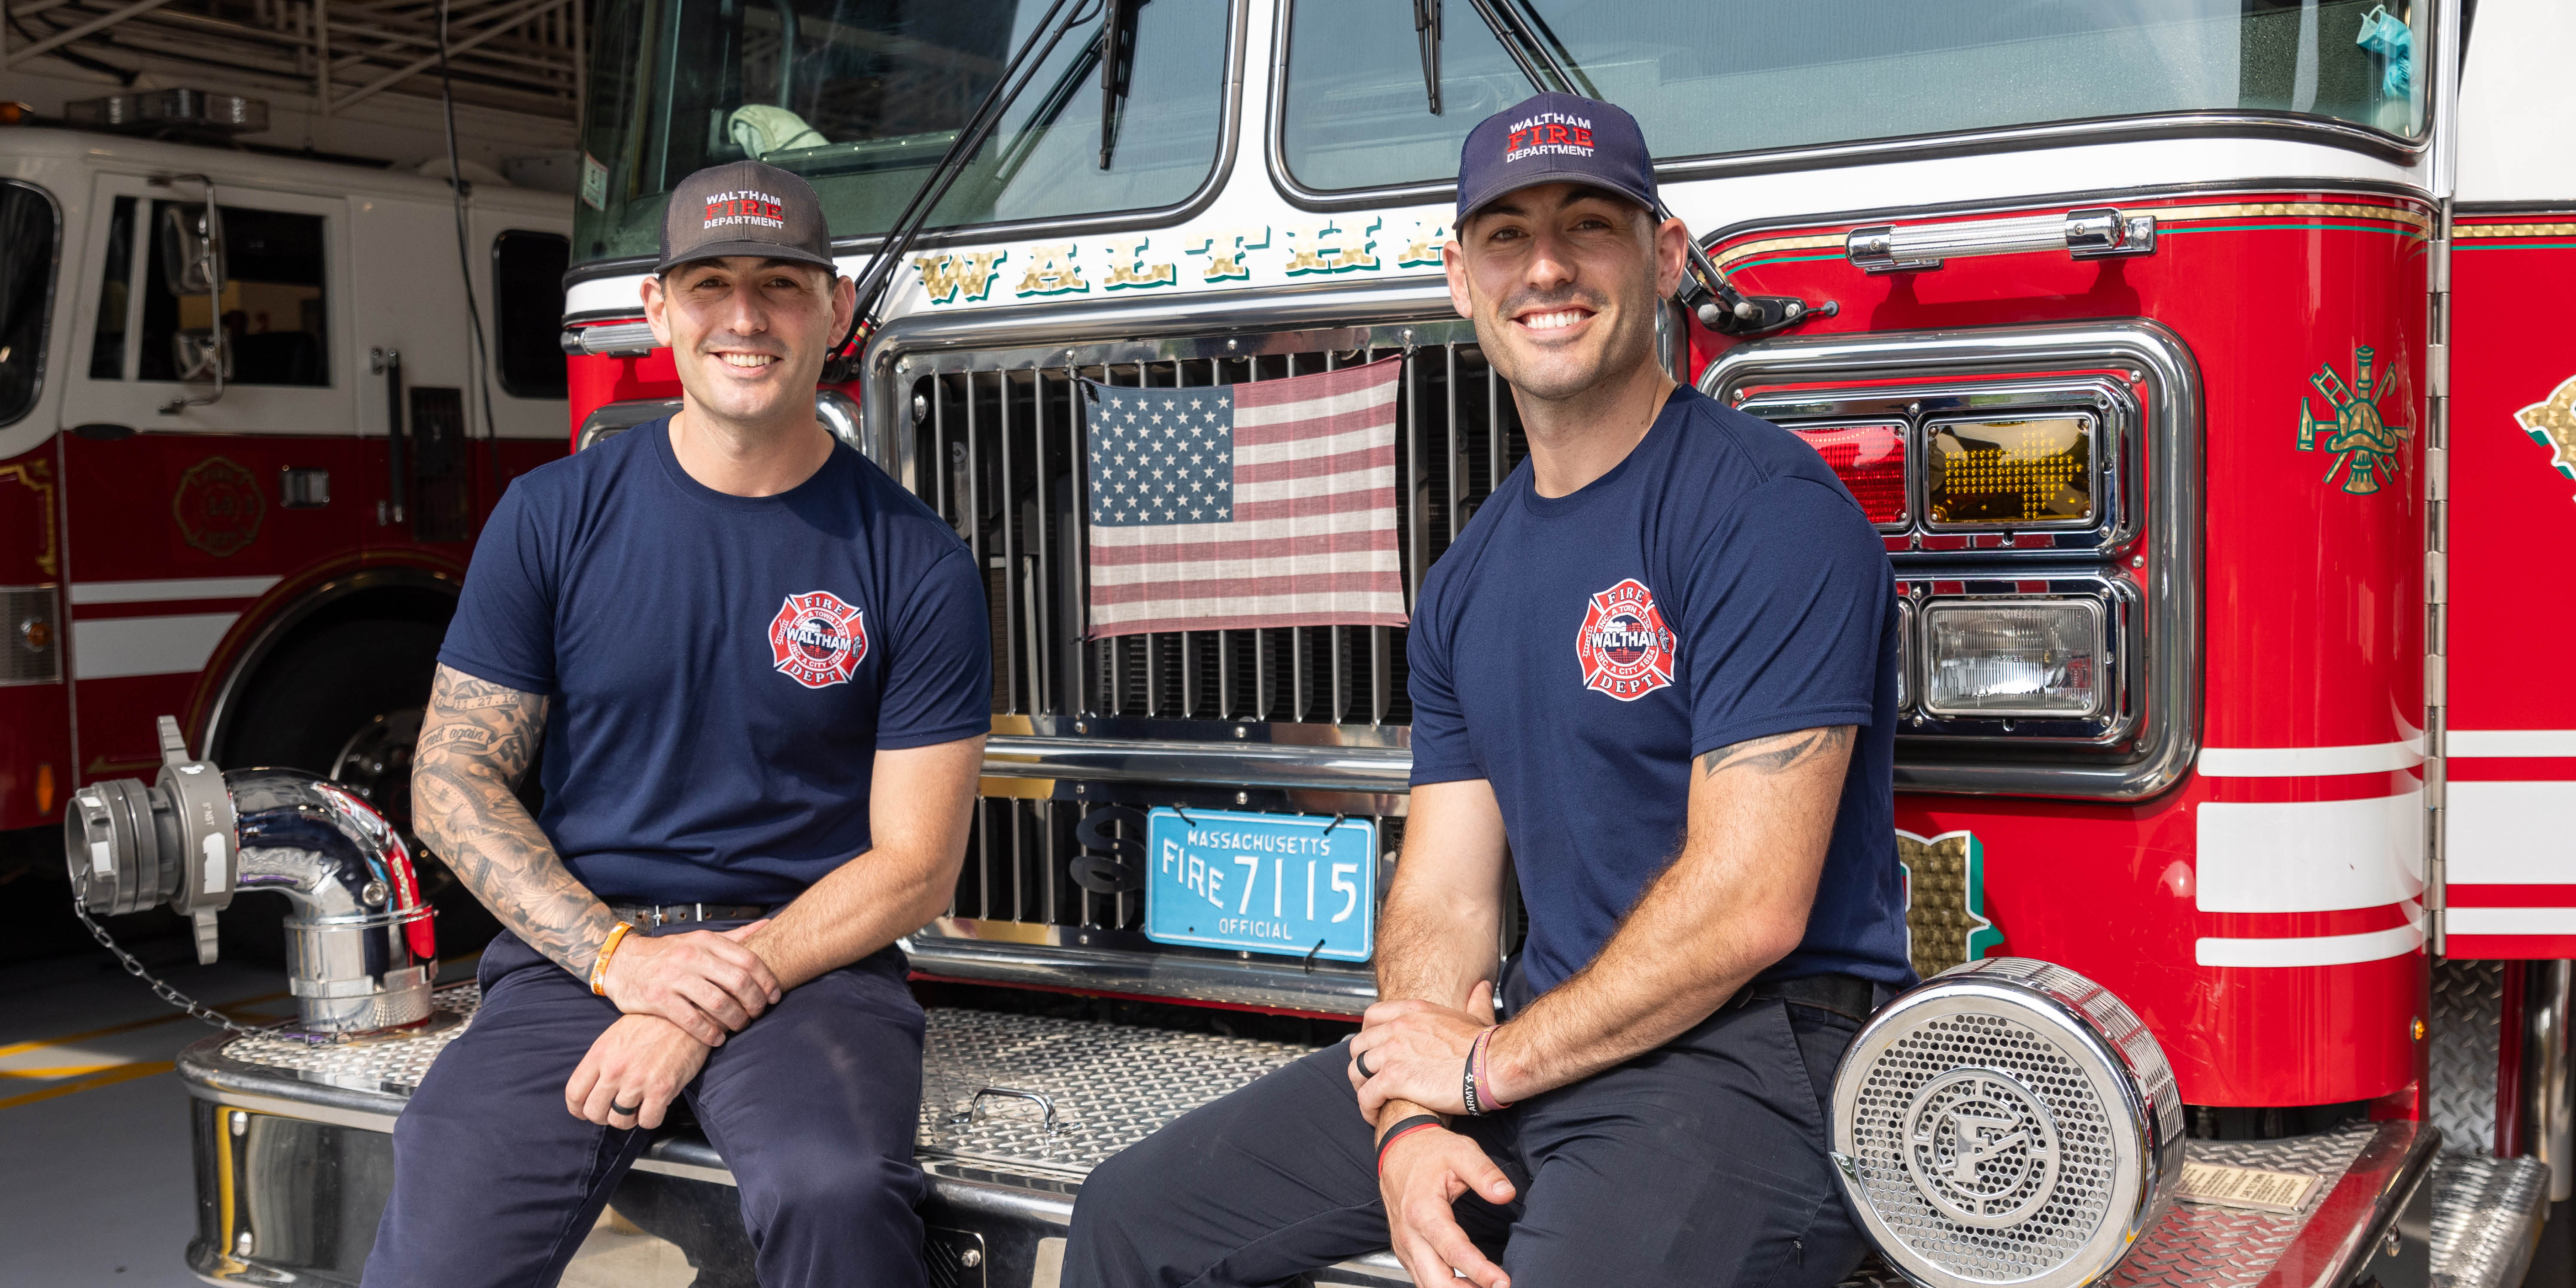 Steve ’12 and Don ’12 Hopkins sit in front of a fire truck